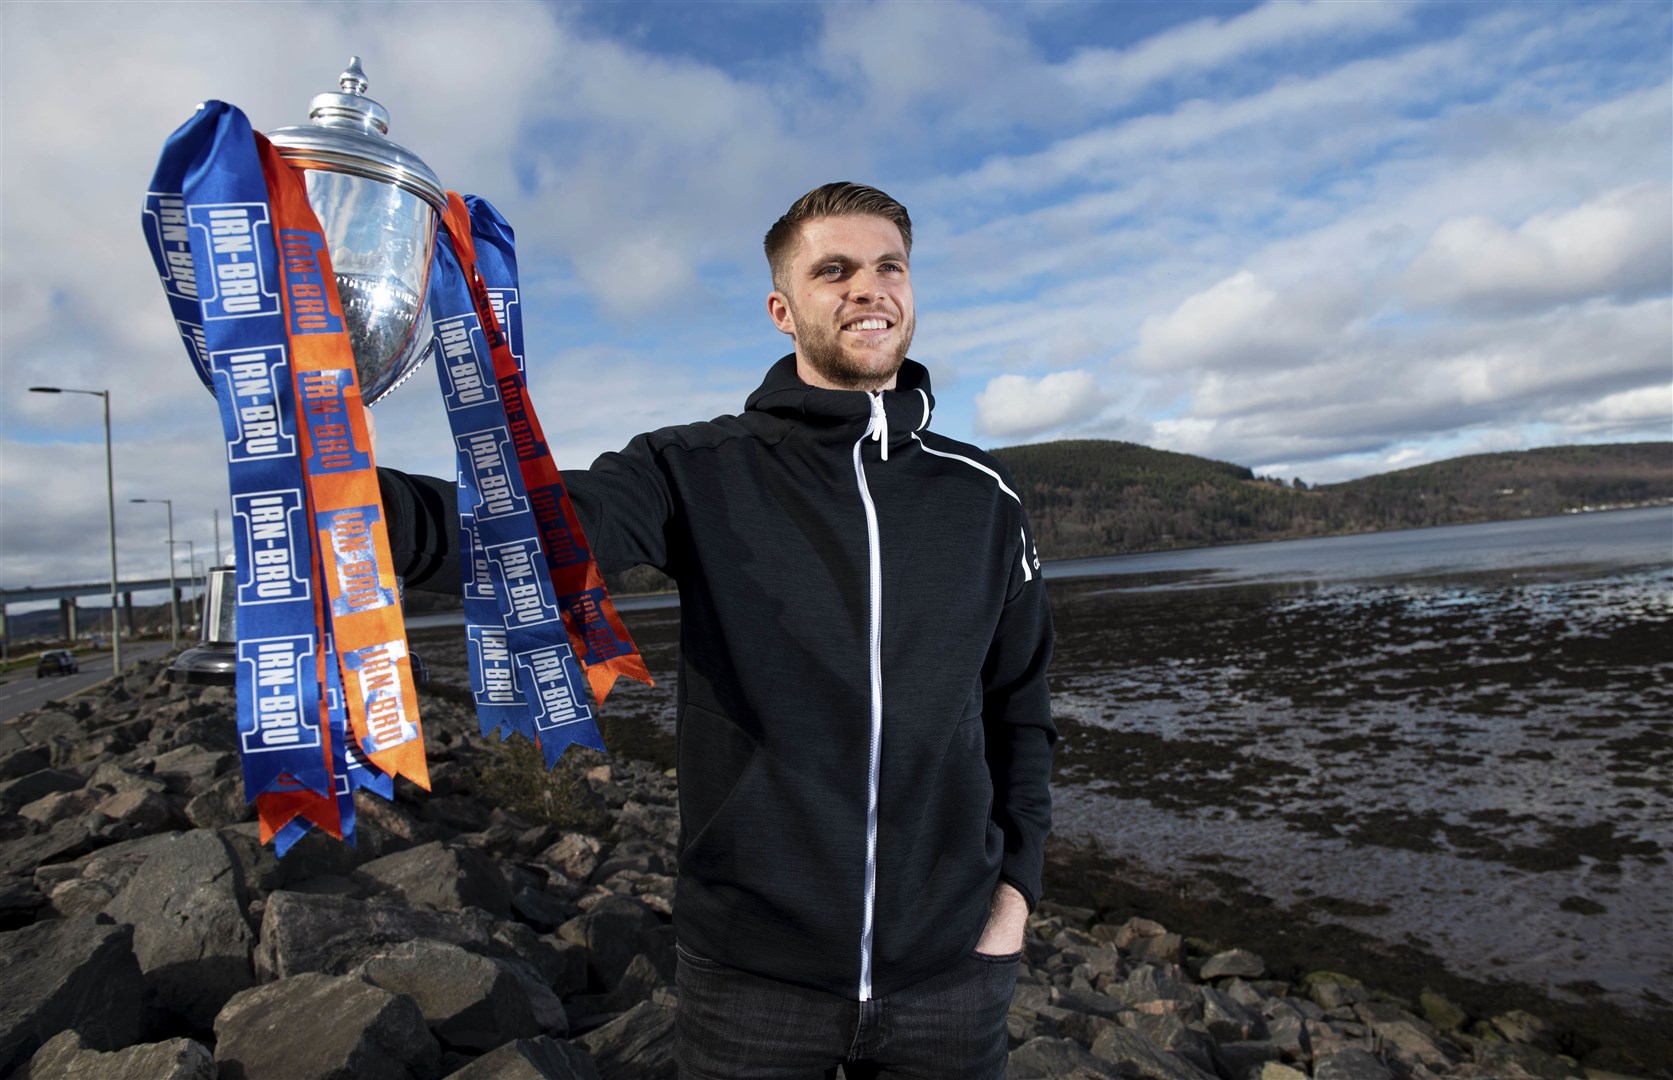 Marcus Fraser wants to give something back to the Ross County fans after last season's relegation – starting with today's Irn-Bru Cup final.